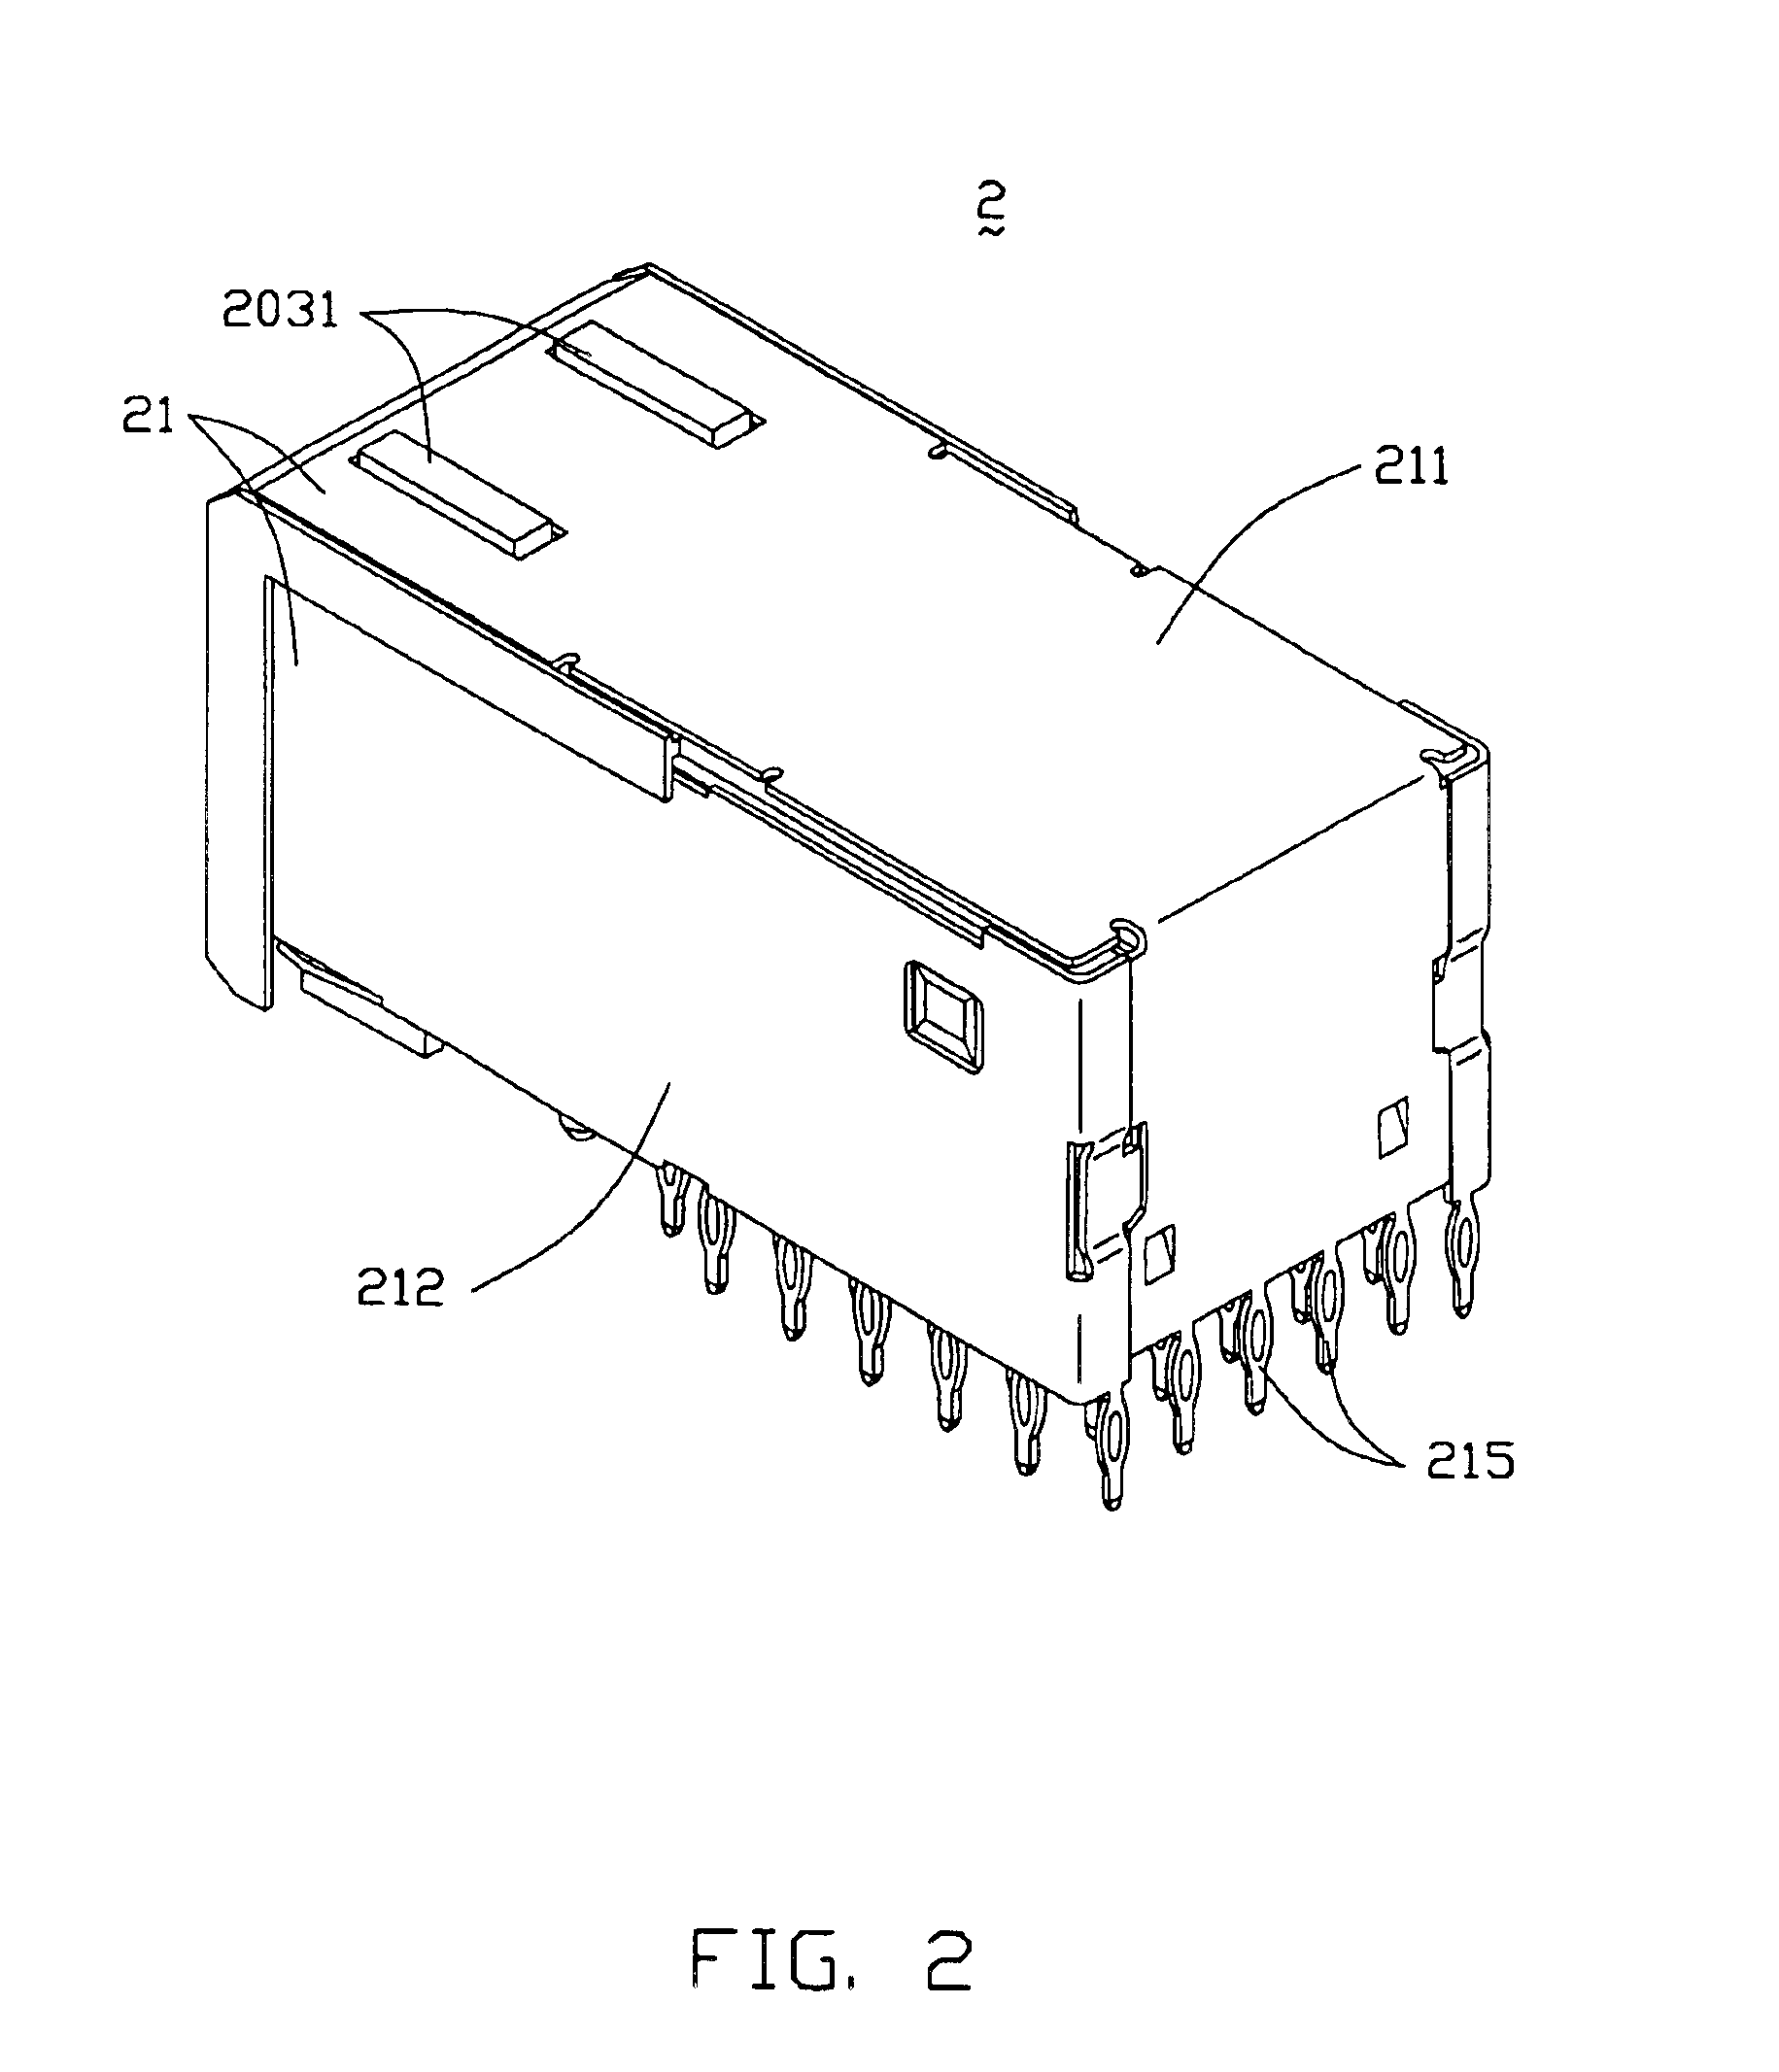 Electrical connector assembly having improved grounding means